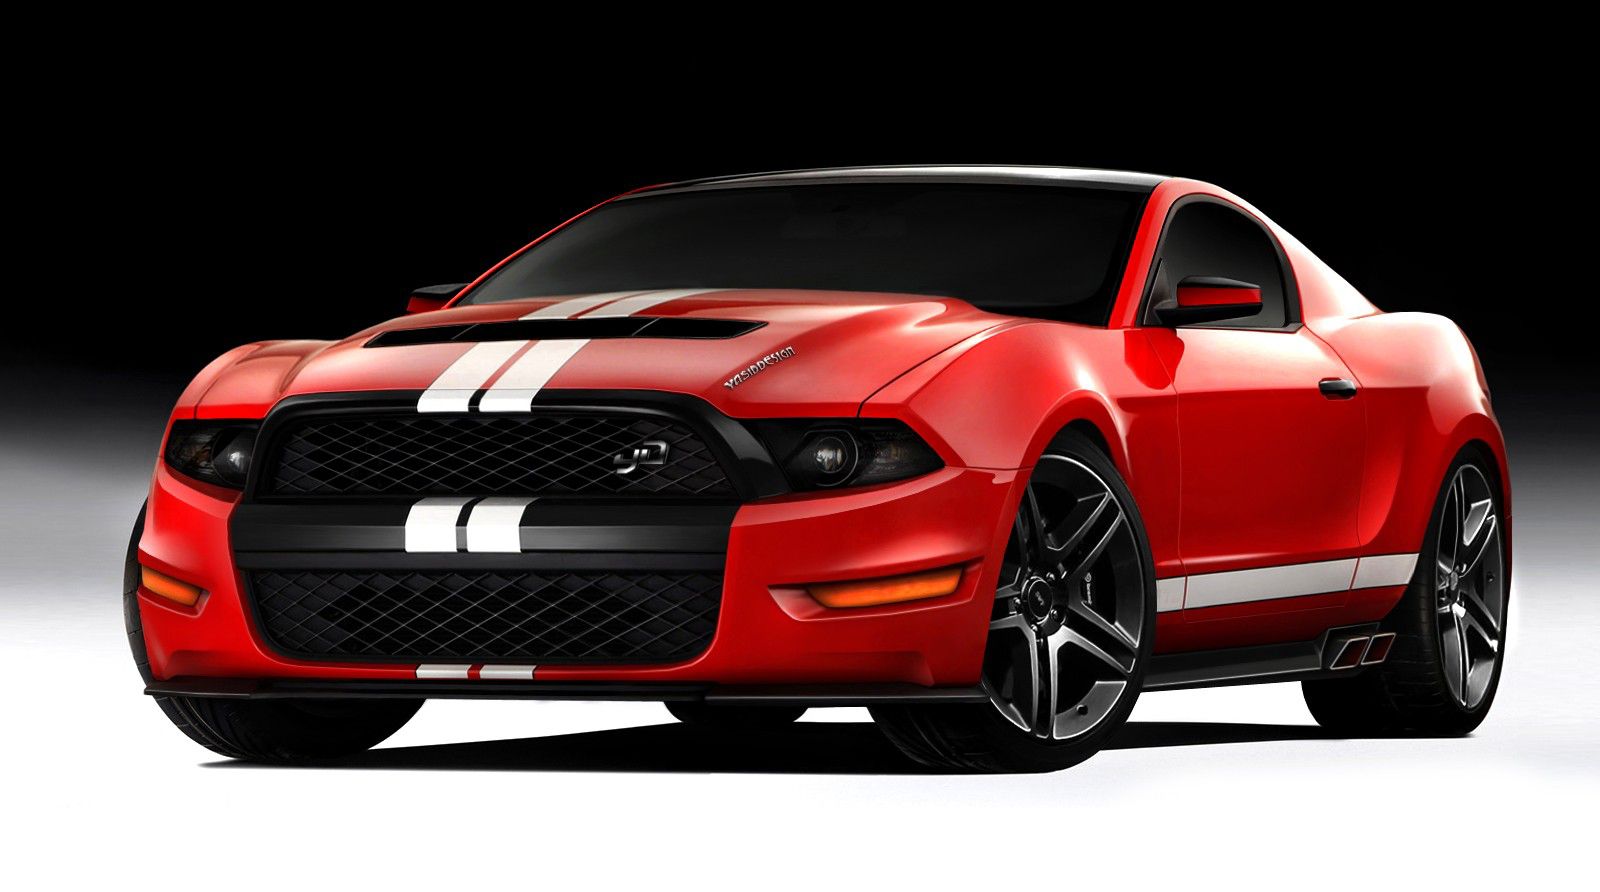 Ford Mustang Shelby Gt500 Cobra HD Picture Wallpaper Attachment